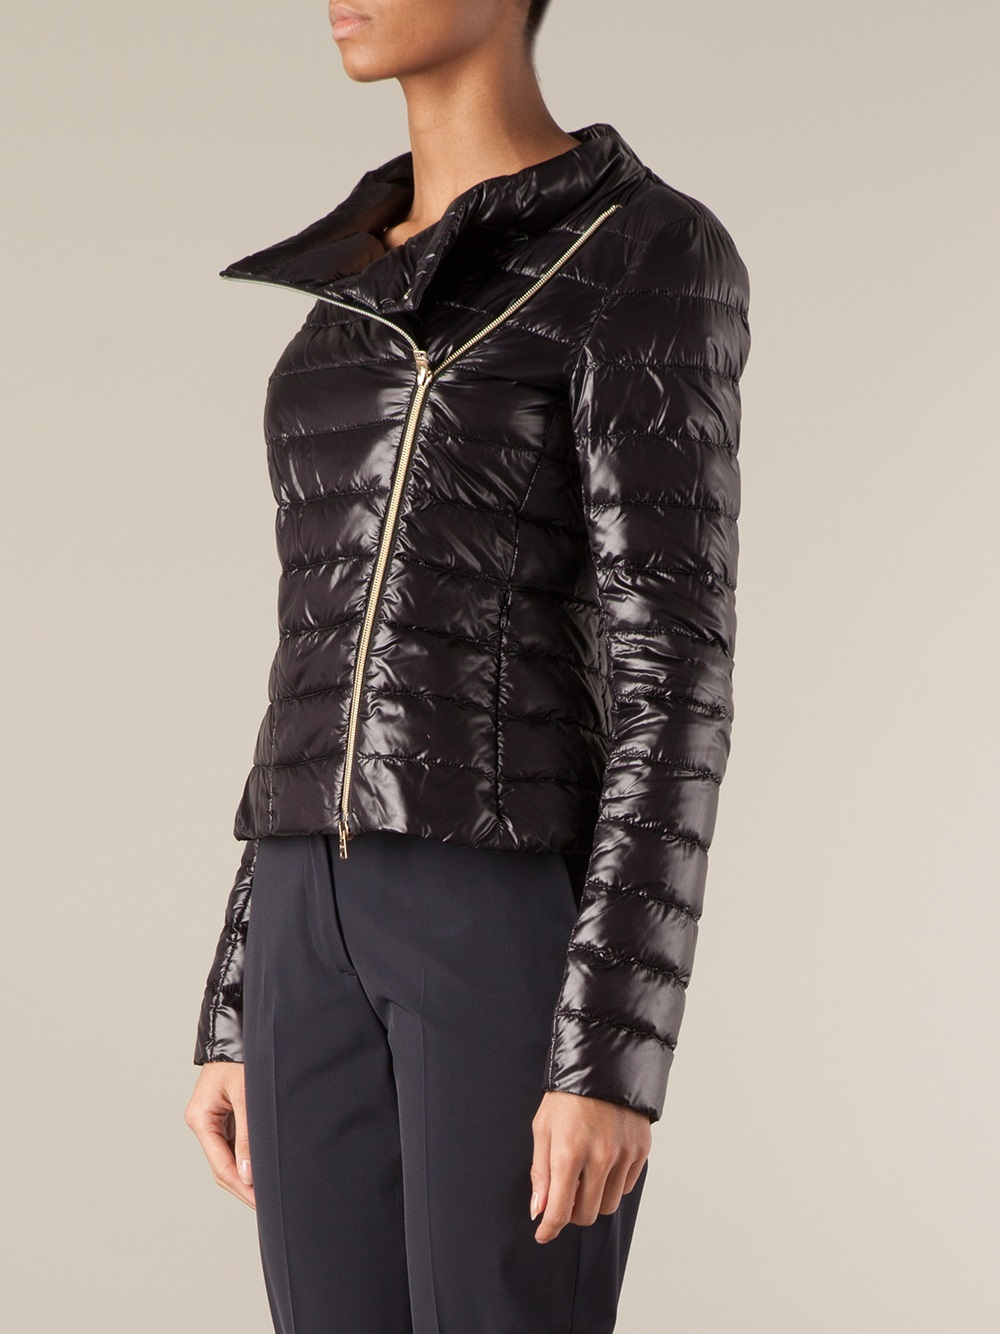 Lyst - Herno Padded Jacket in Black